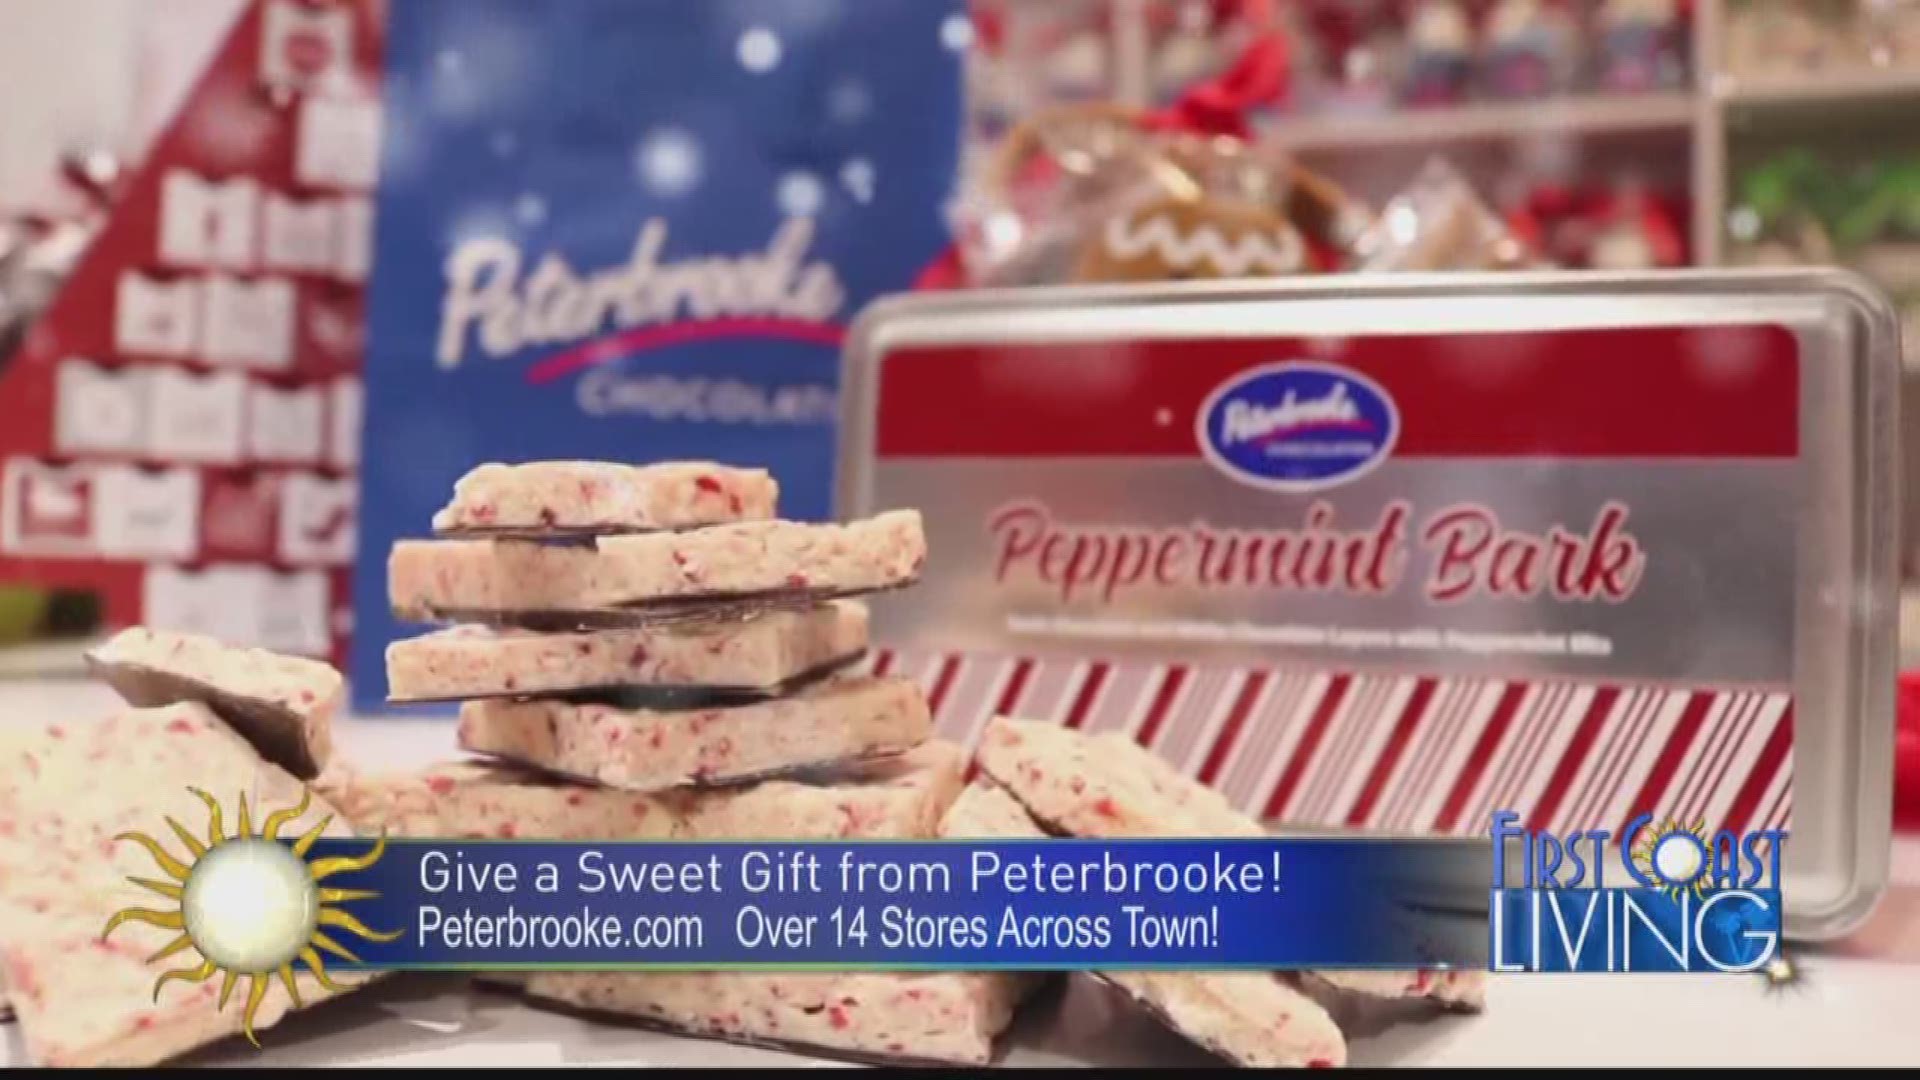 Still looking for a gift for your loved ones this holiday season? See what Peterbrooke has to offer!